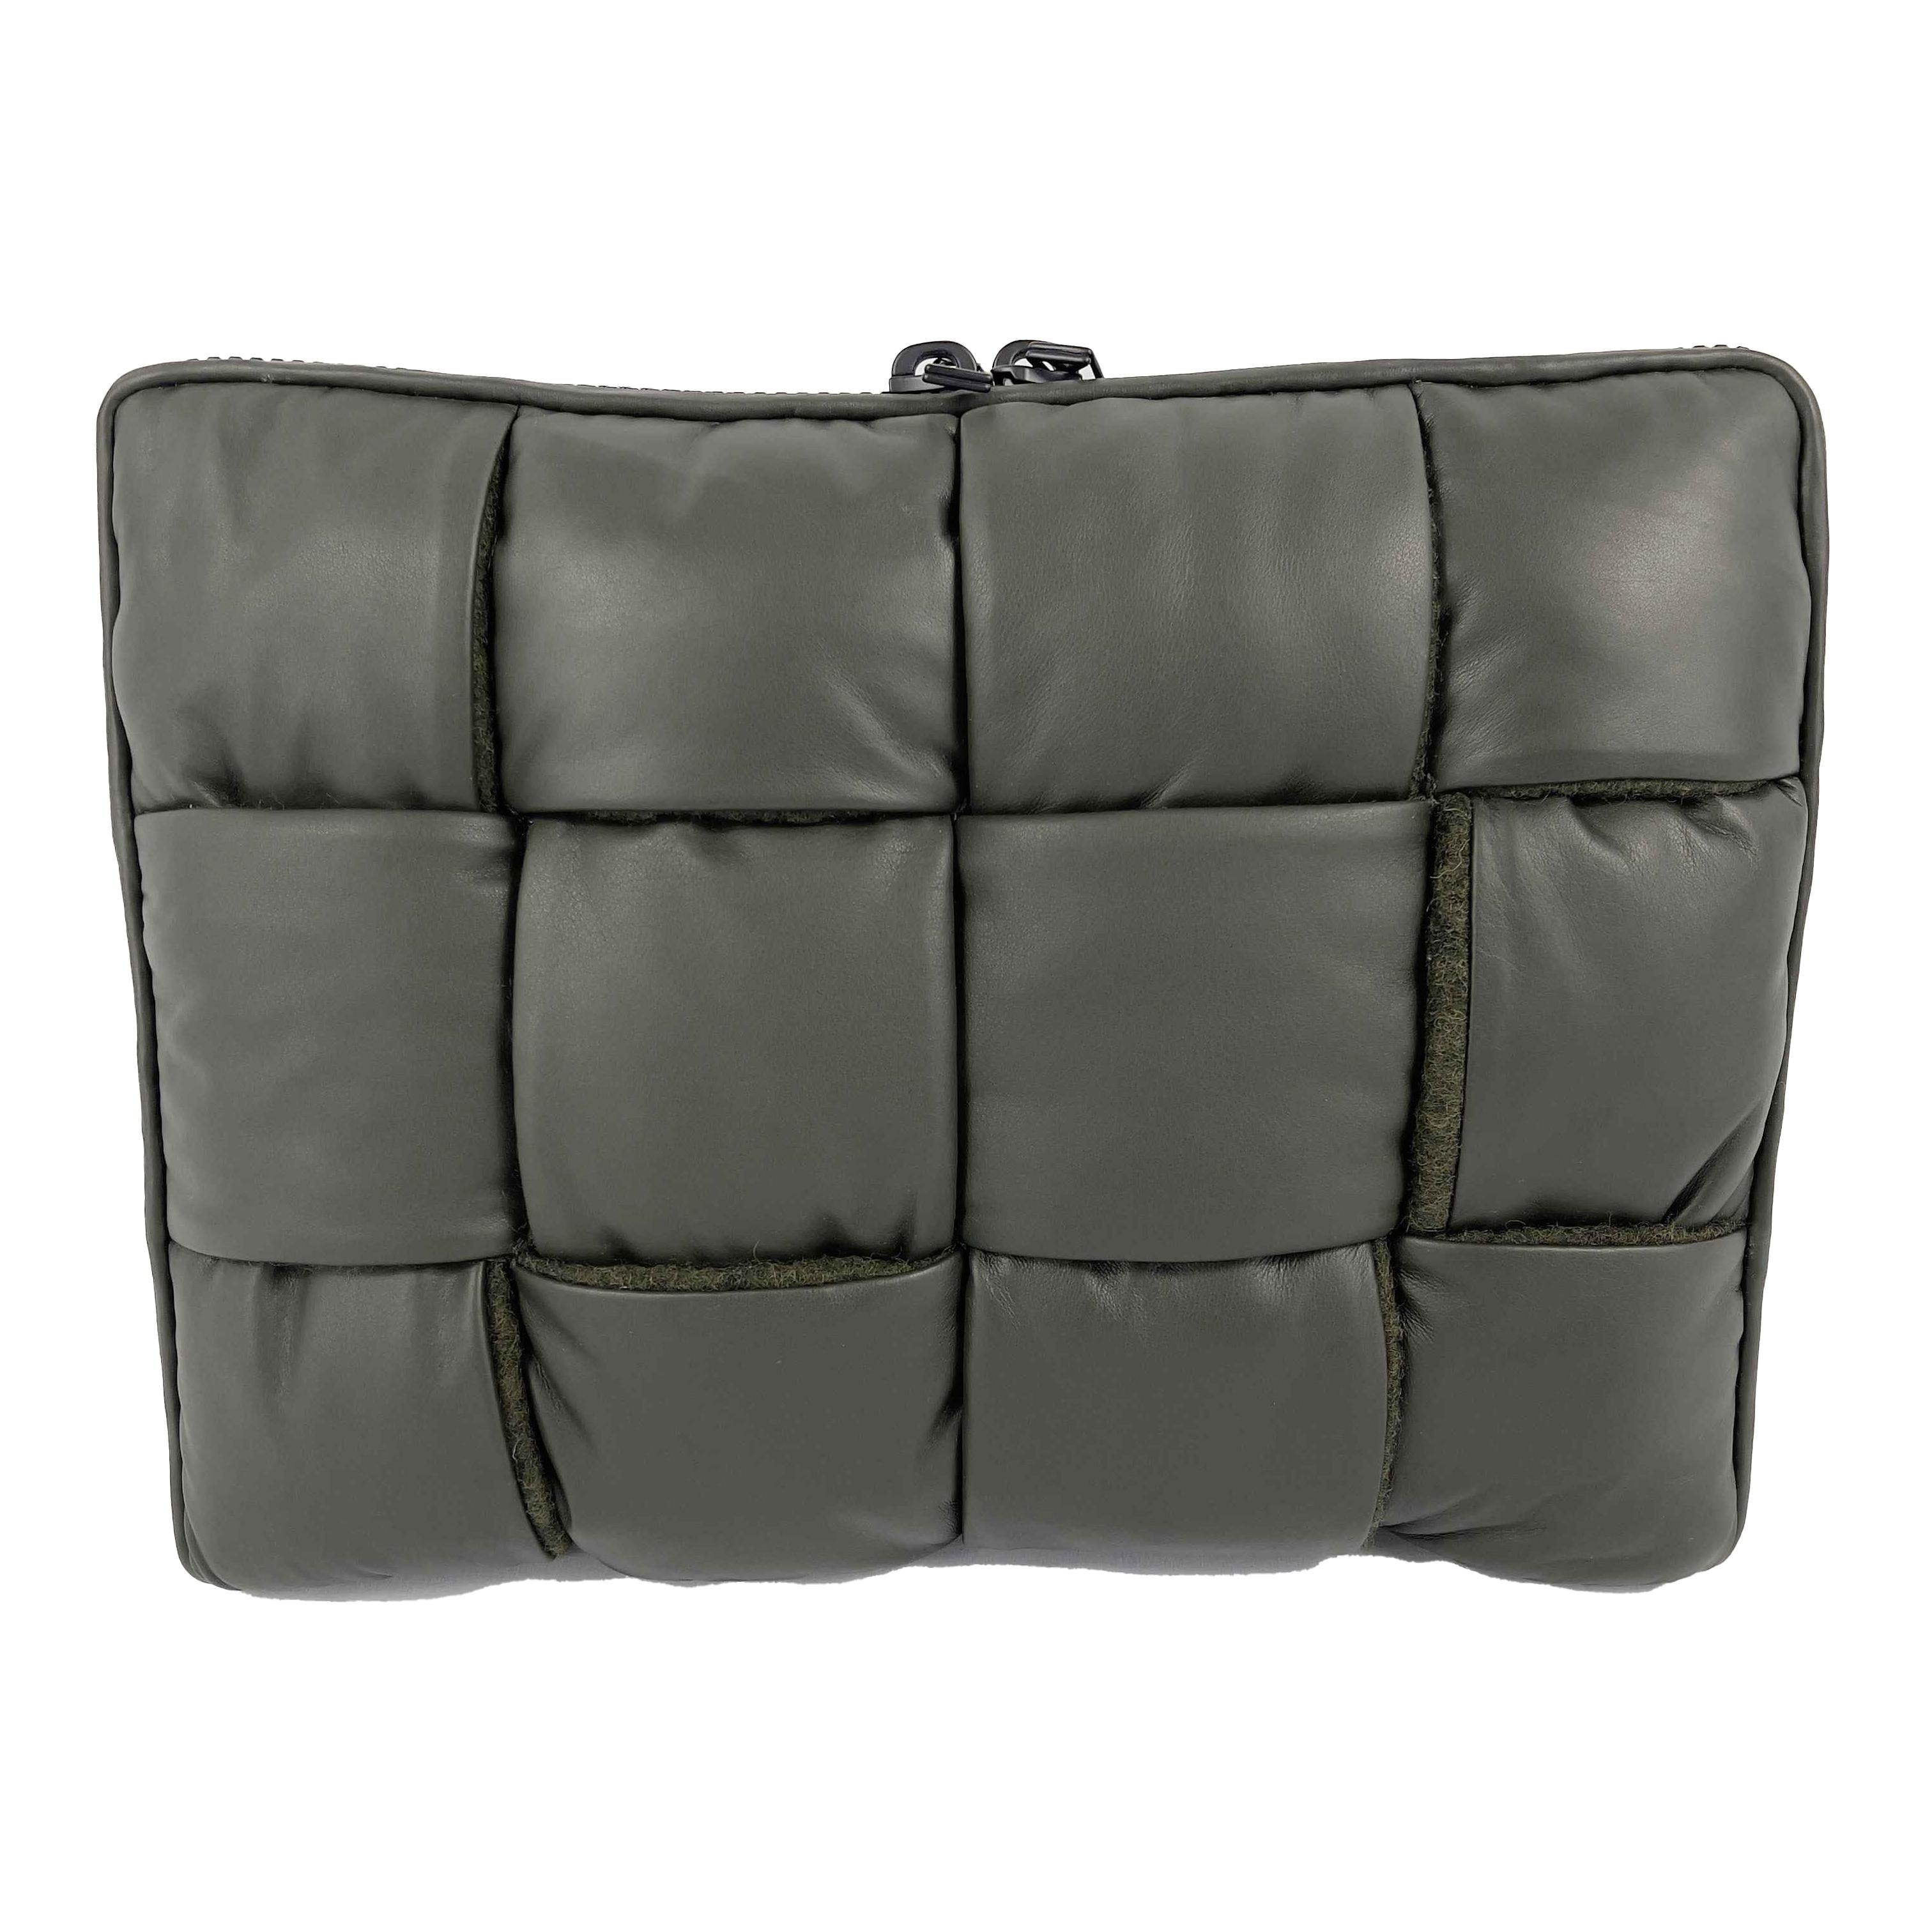 Bottega Veneta - Padded Maxi Intrecciato Woven Laptop Pouch - Green Clutch - NWT

Description

Keep your essentials and technology safely and stylishly stored with this maxi Intrecciato woven pouch from Bottega Veneta.
Fashioned in smooth deep green